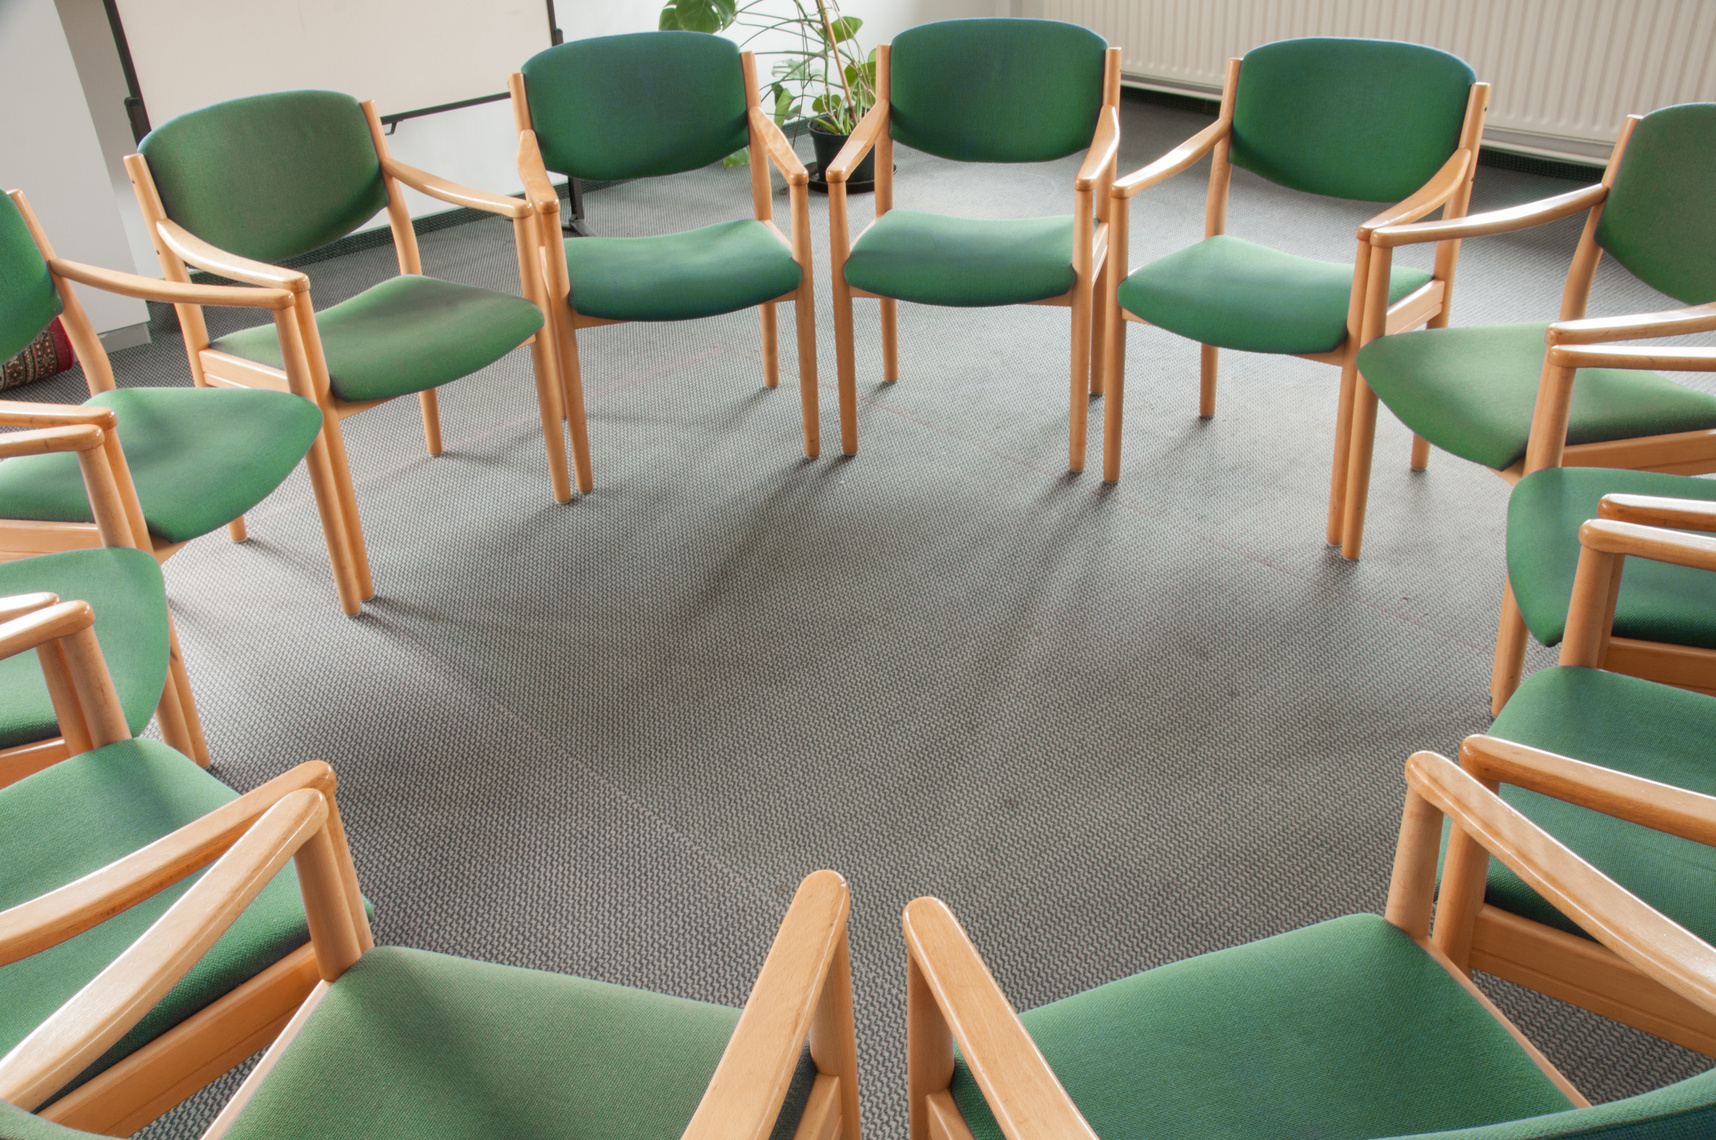 Green chairs in a circle